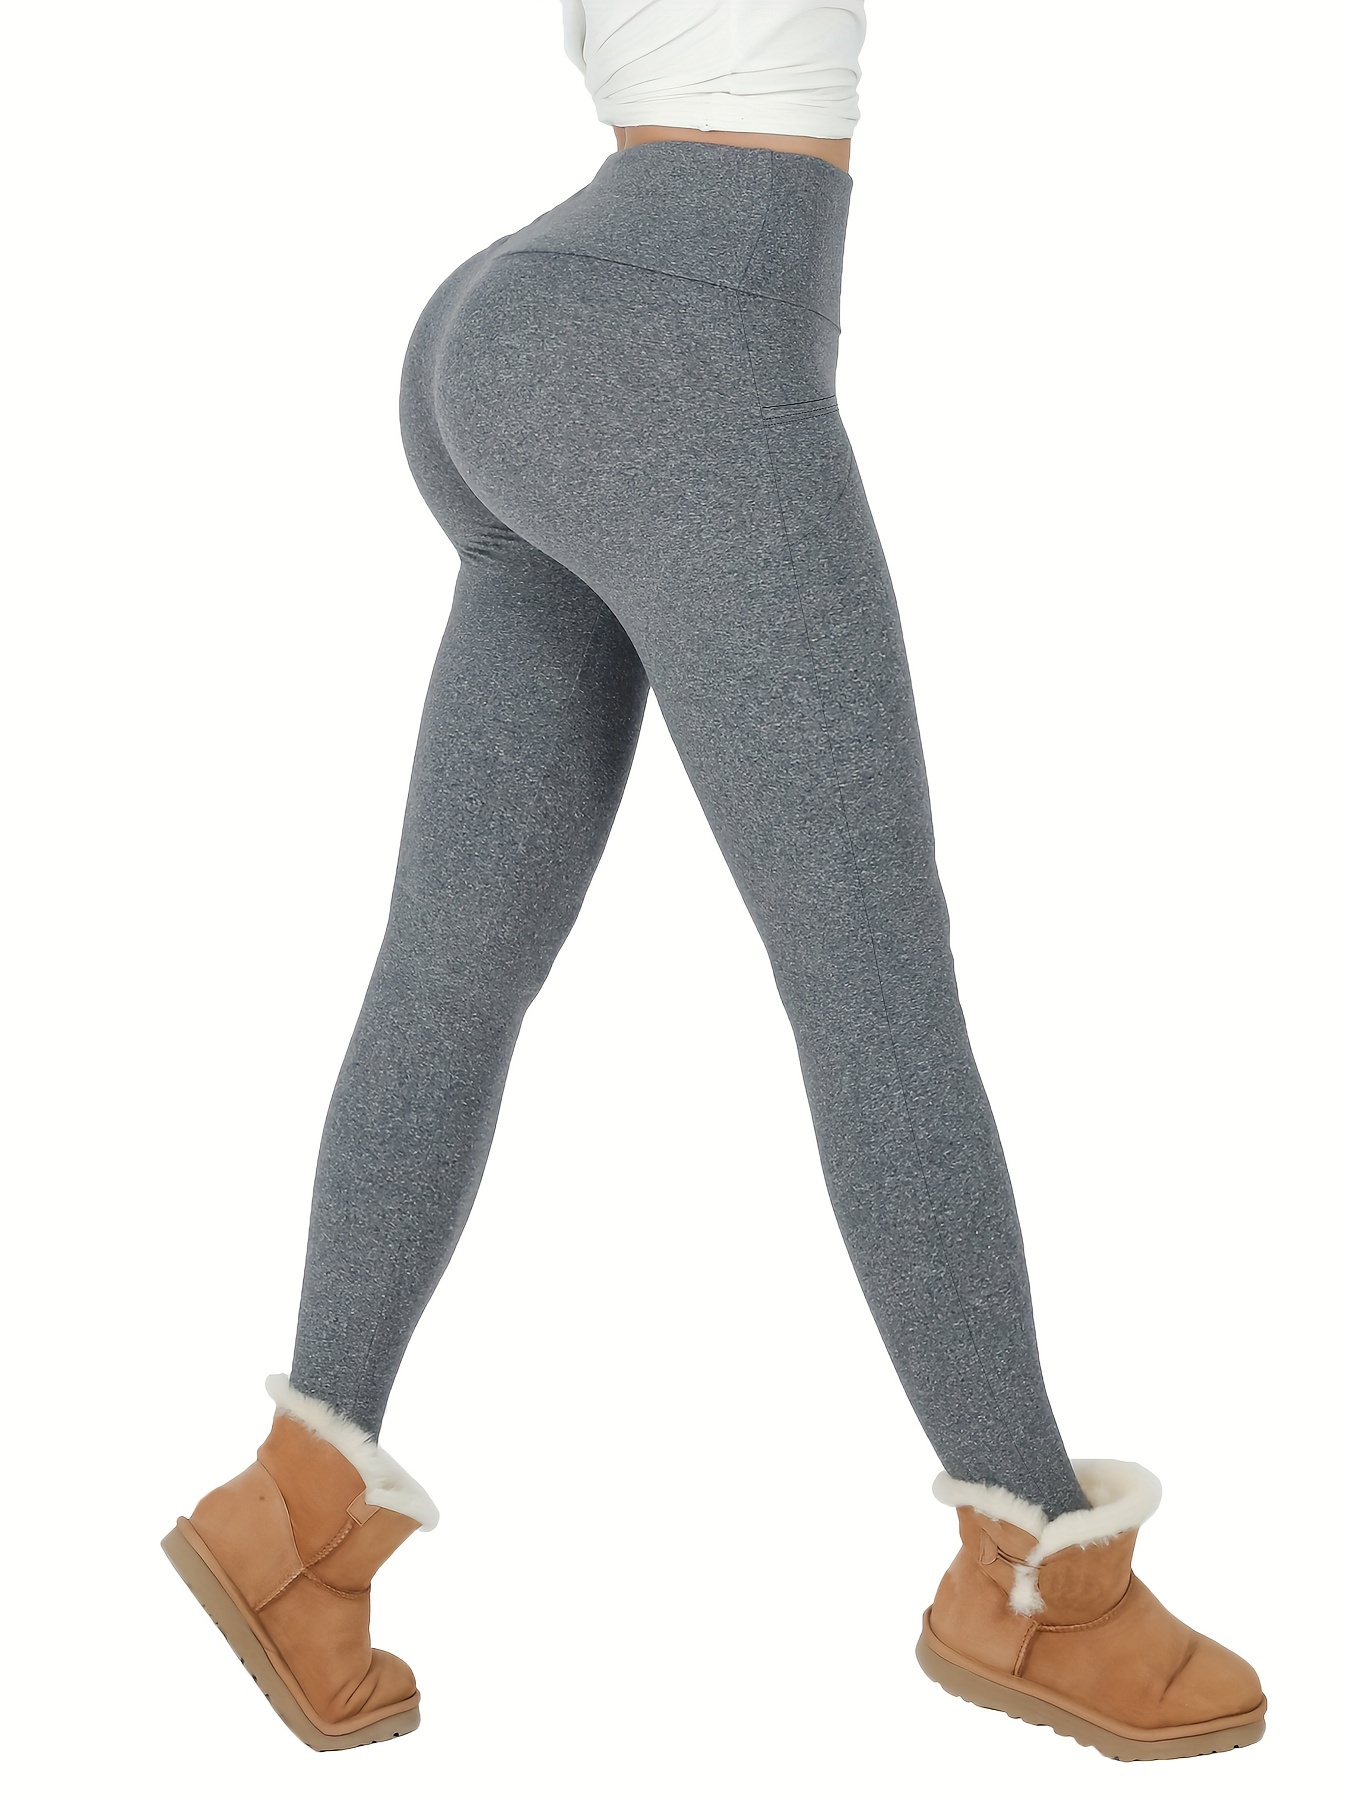 Tengo Thermal Fleece Lined Leggings with Pockets for Women,High Waisted  Winter Warm Thick Yoga Leggings